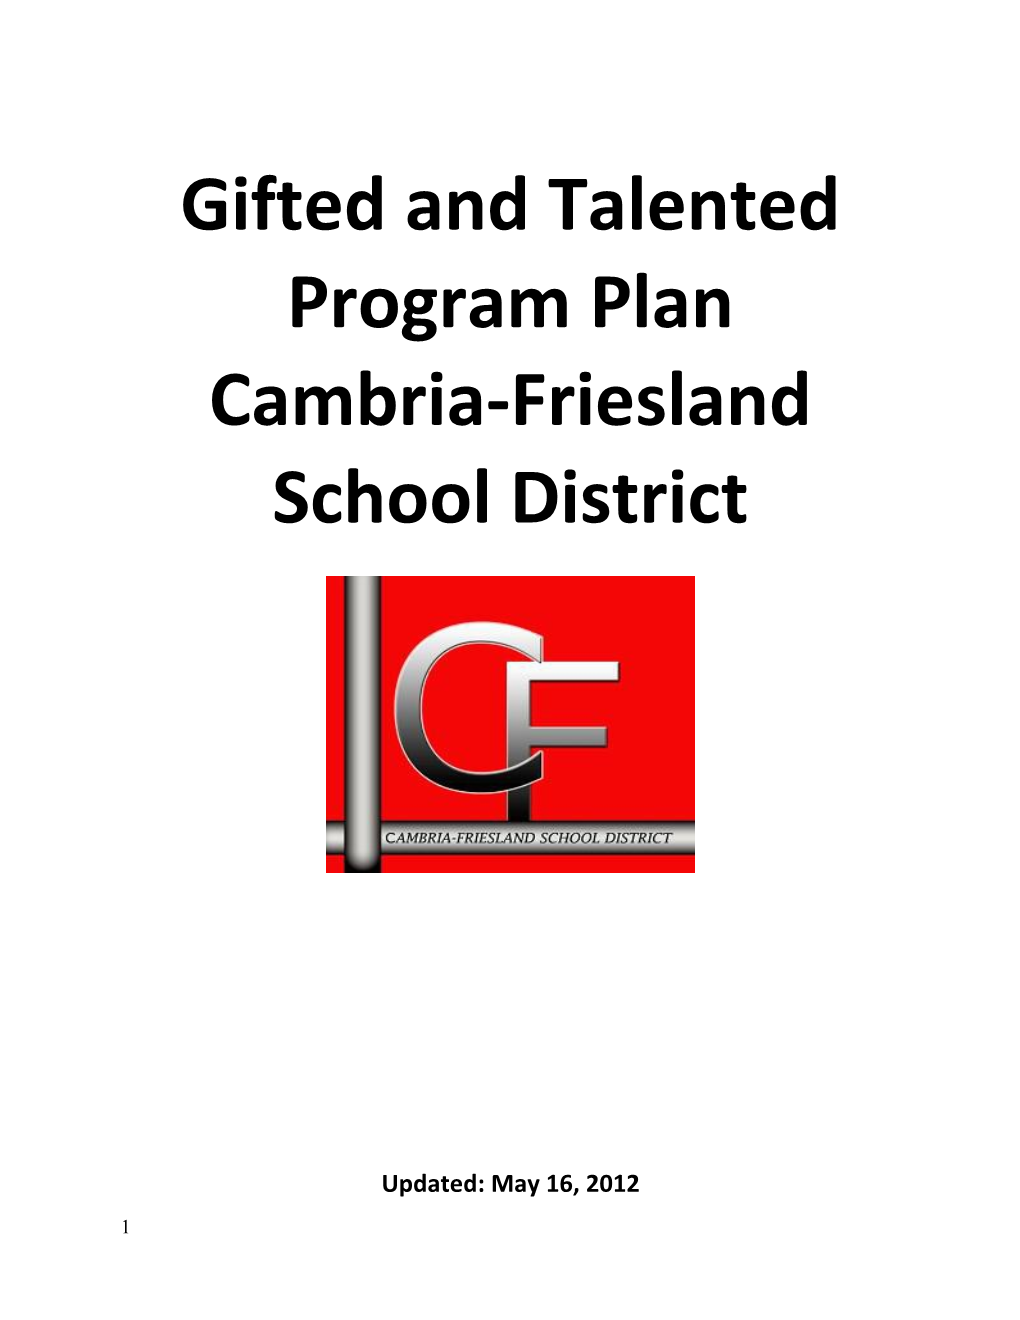 Kiel Area School District Services for Gifted and Talented Students s1